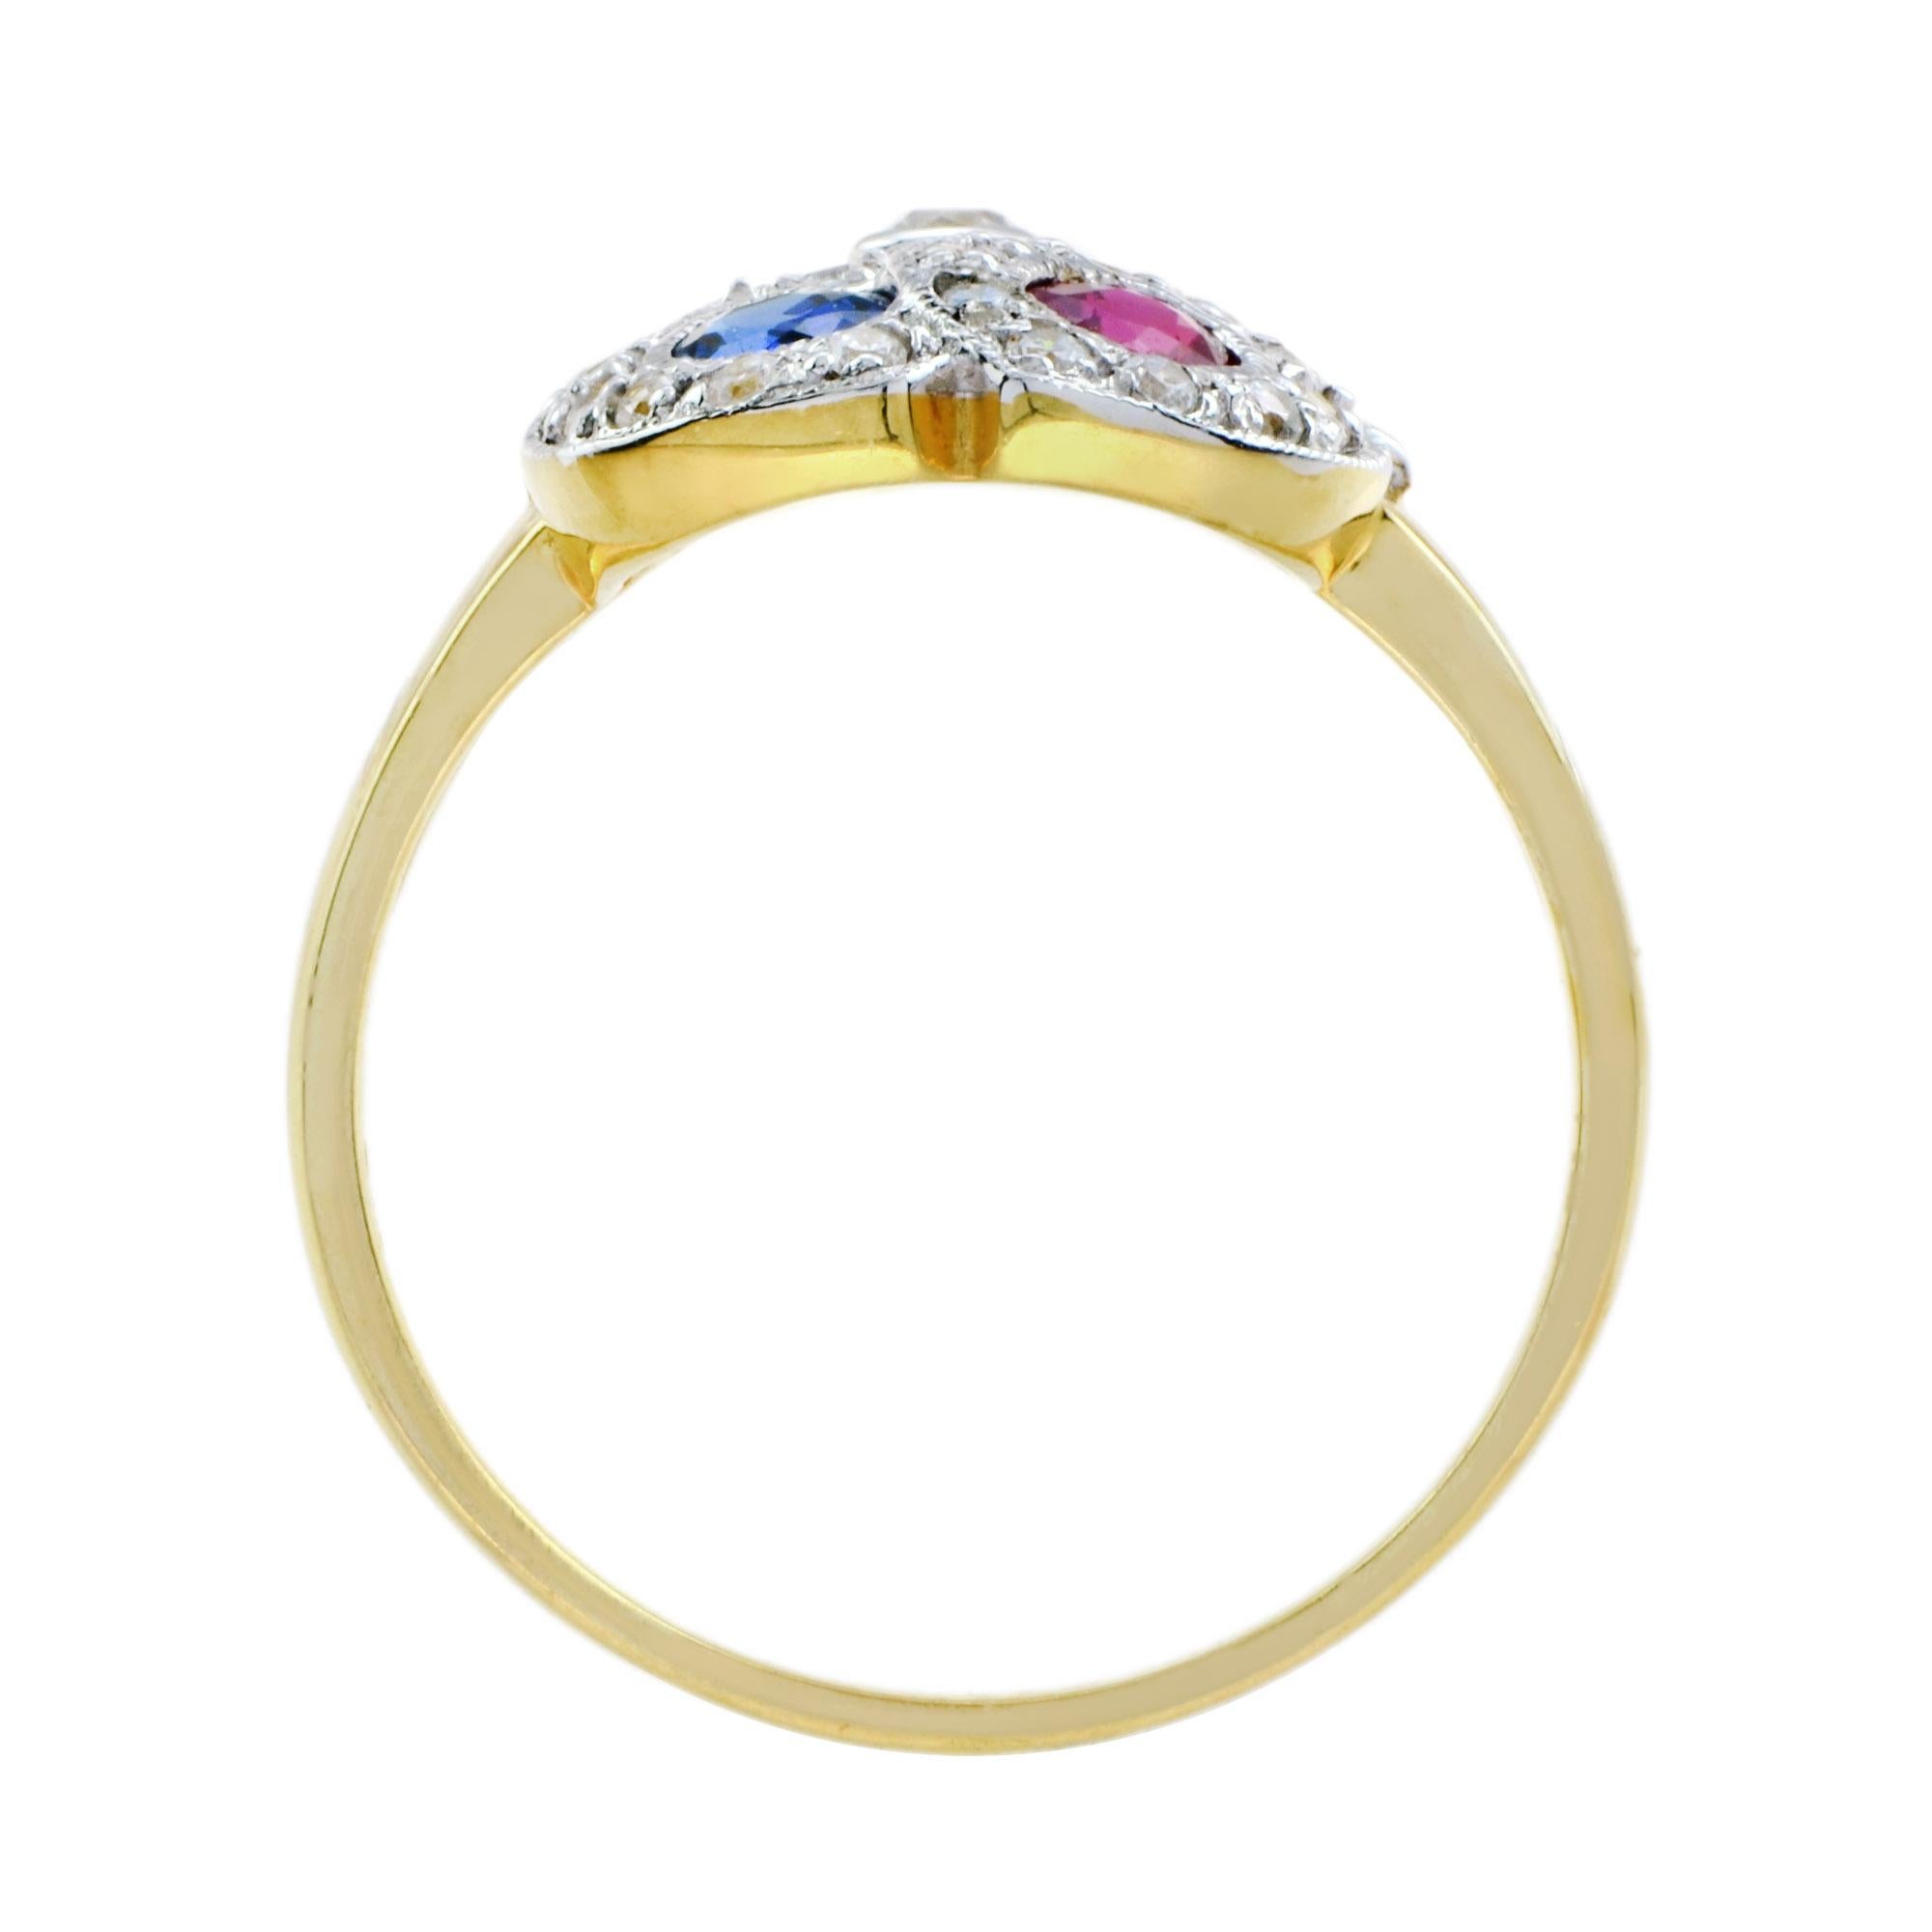 For Sale:  Blue Sapphire Ruby Diamond Double Heart Vintage Style Ring in 14K Yellow Gold 6